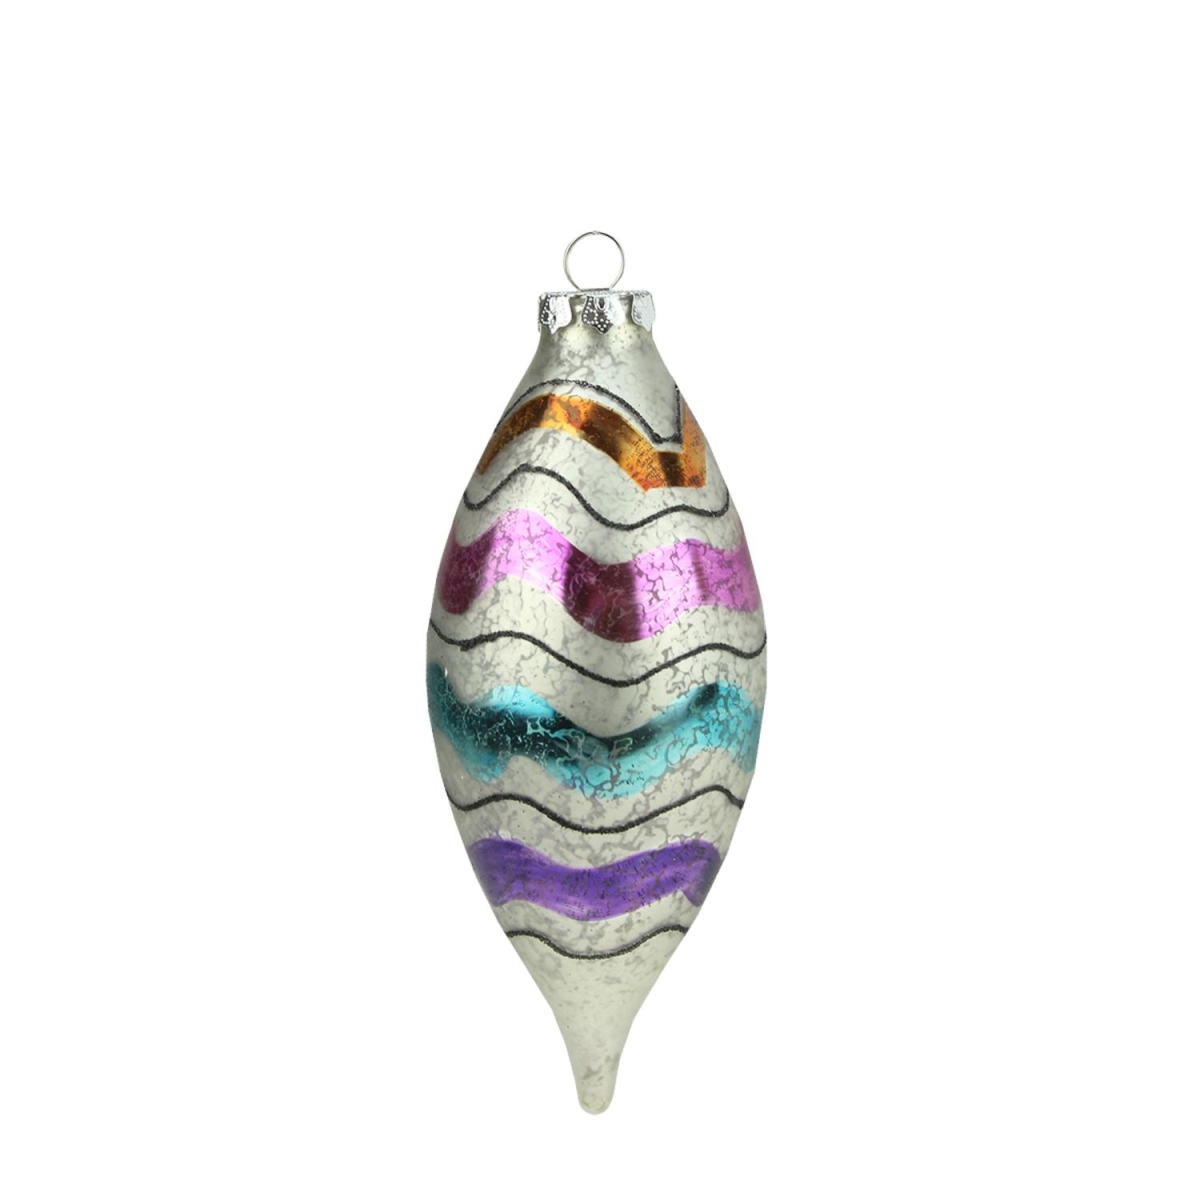 31750697 7 In. Merry & Bright White Mercury Glass Striped Christmas Finial Ornament